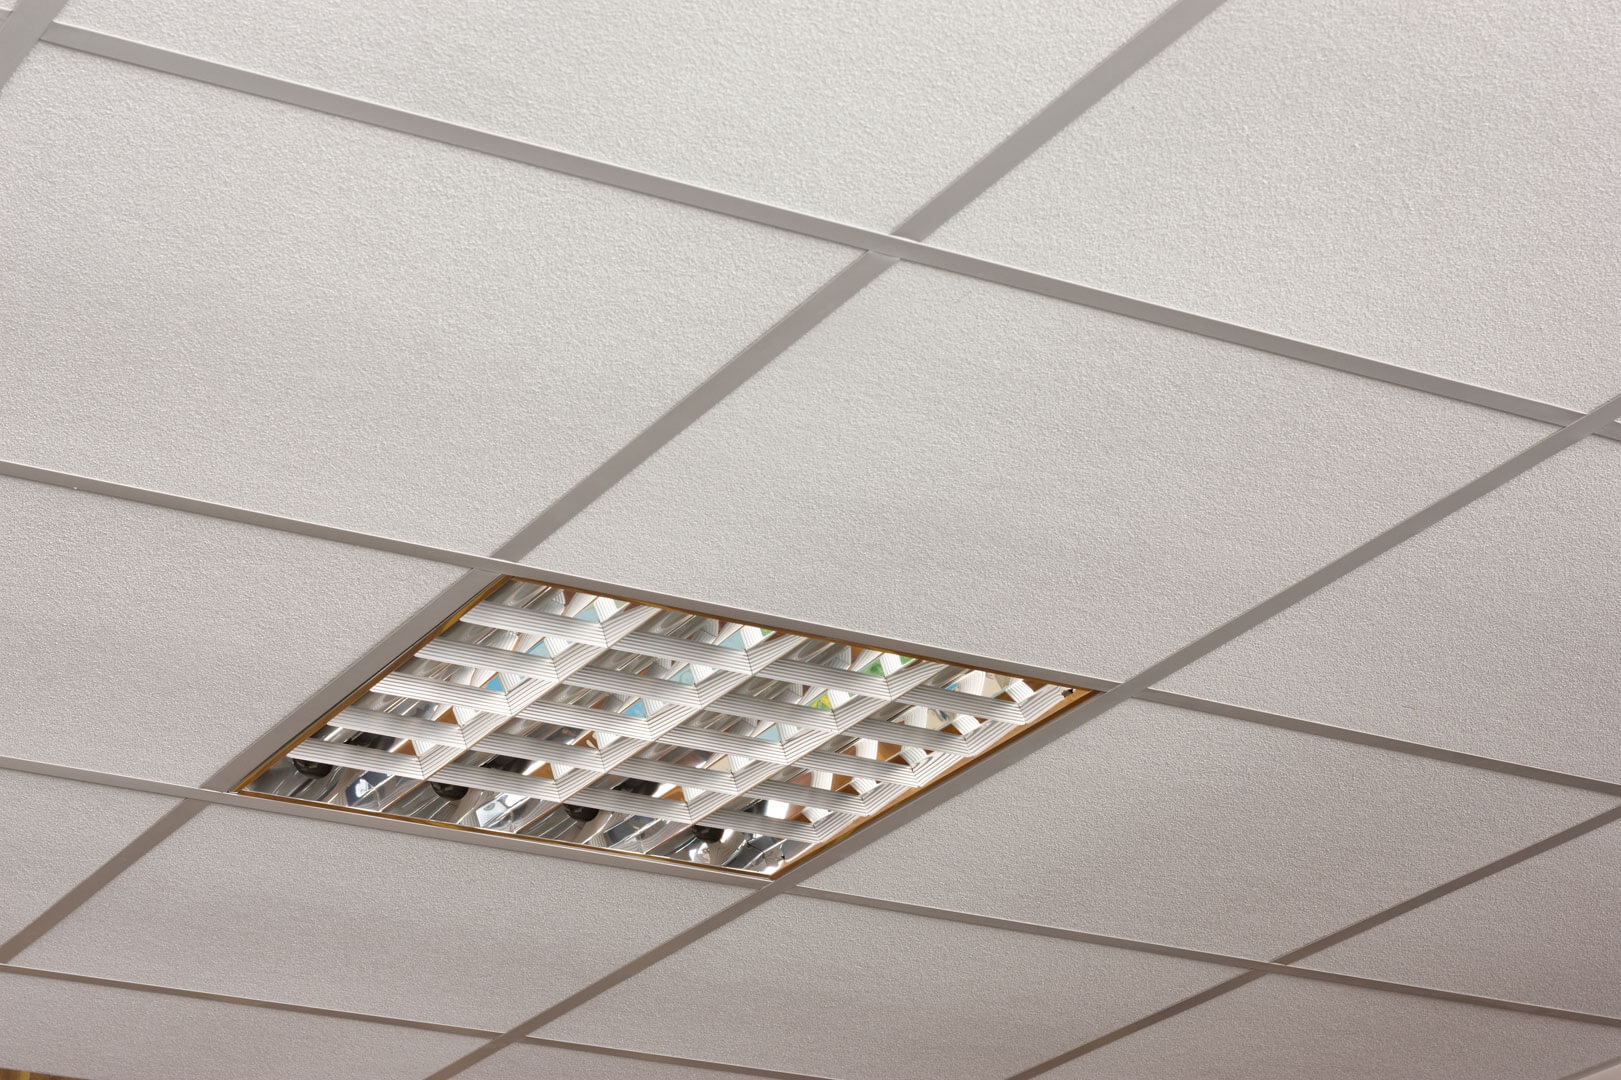 Armstrong Cortega 600×600 Suspended Ceiling Tilesceiling tiles lights accessories a leading uk supplier of